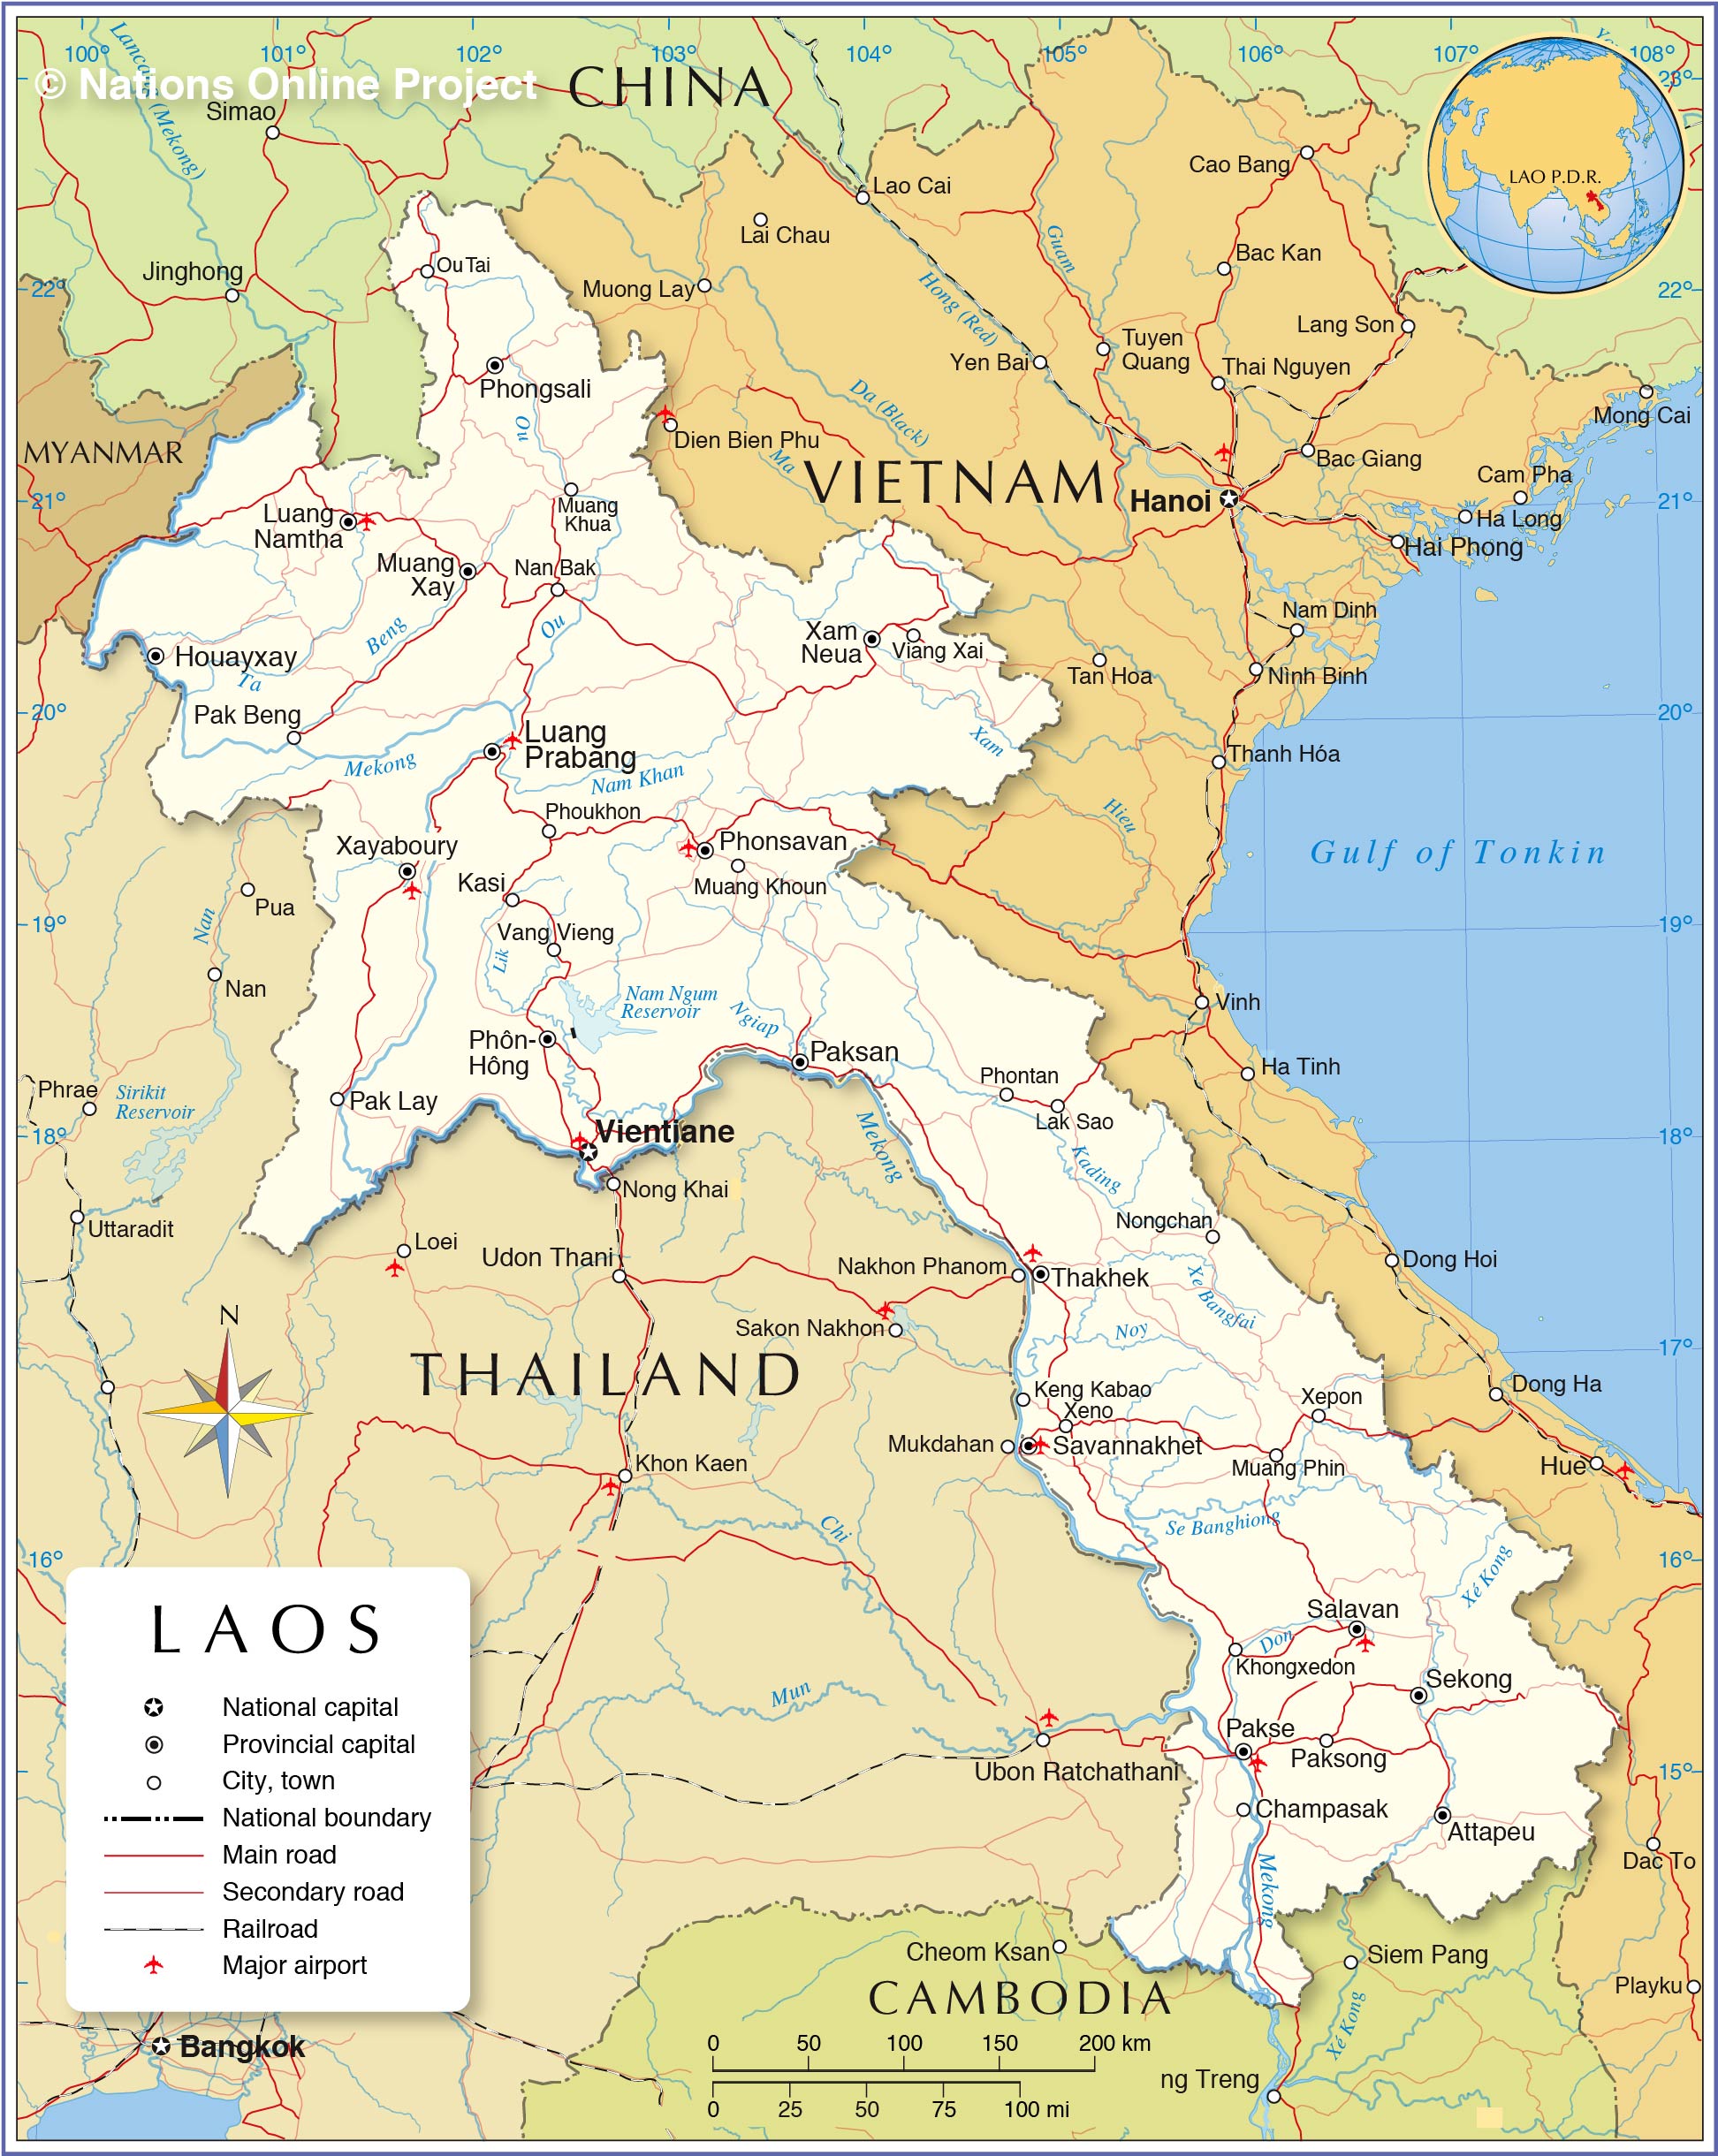 Political Map of Laos - Nations Online Project